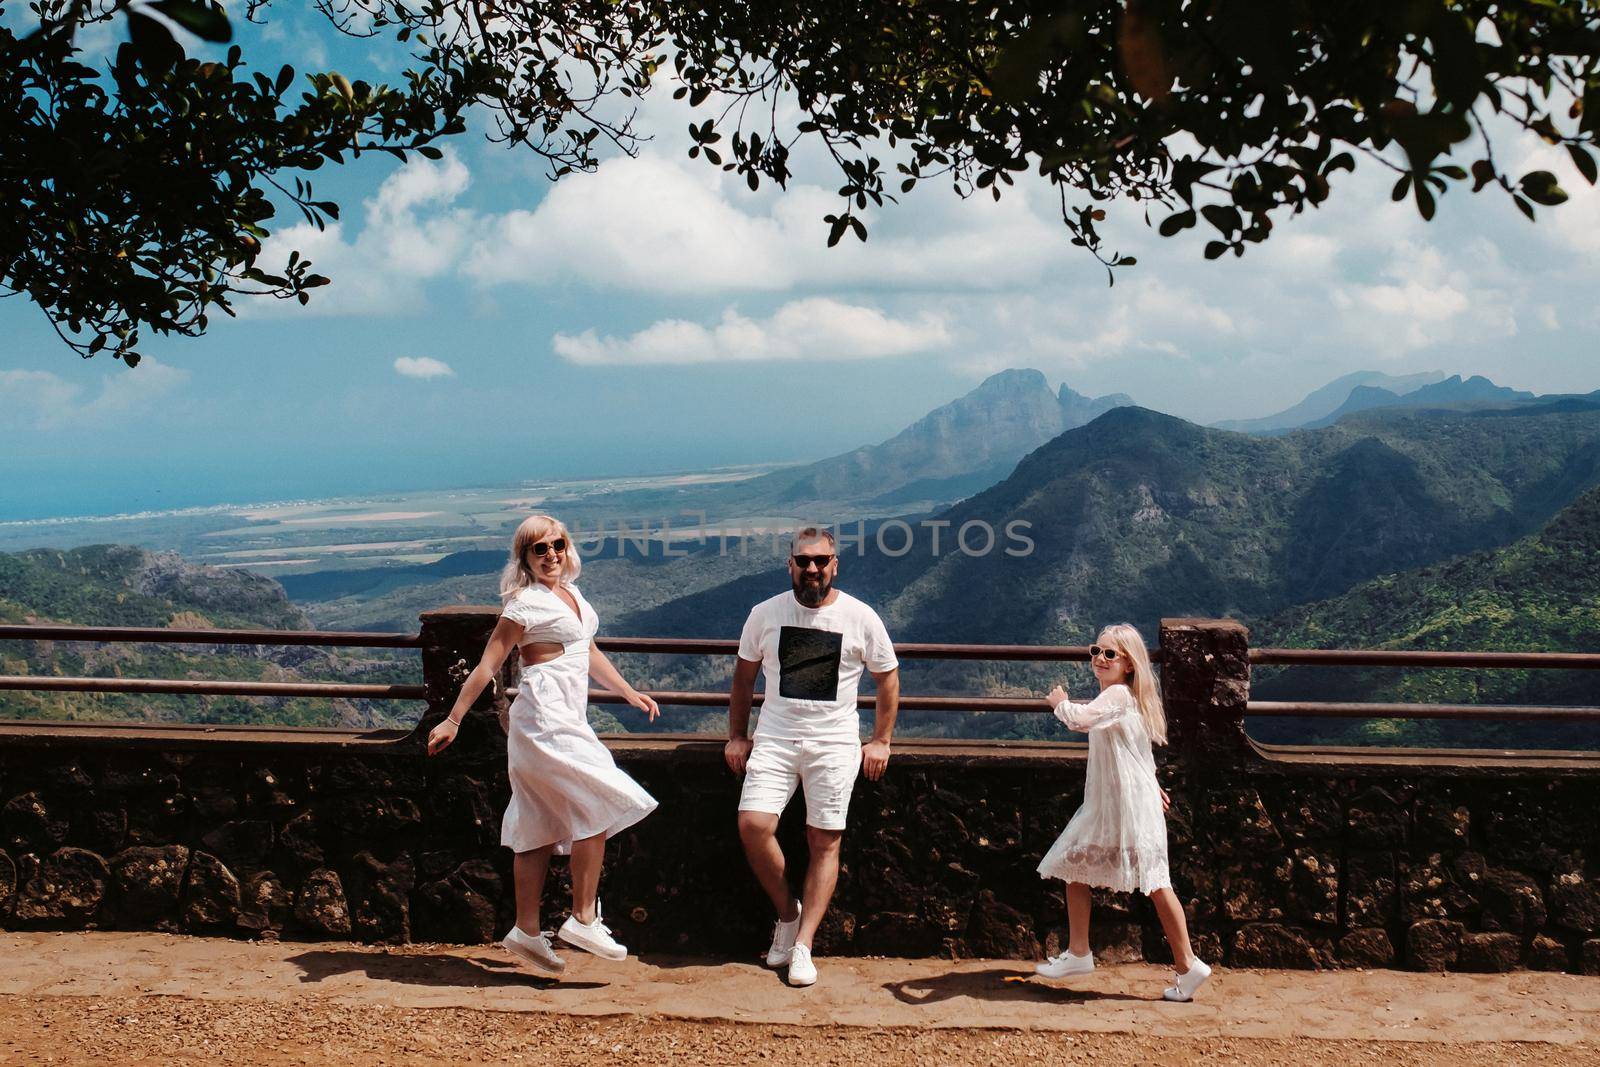 a happy family, a man, a woman and a daughter, are jumping merrily against the background of mountains and jungles of the island of Mauritius.A couple and daughter in the jungle of the island of Mauritius in white clothes walking in Africa